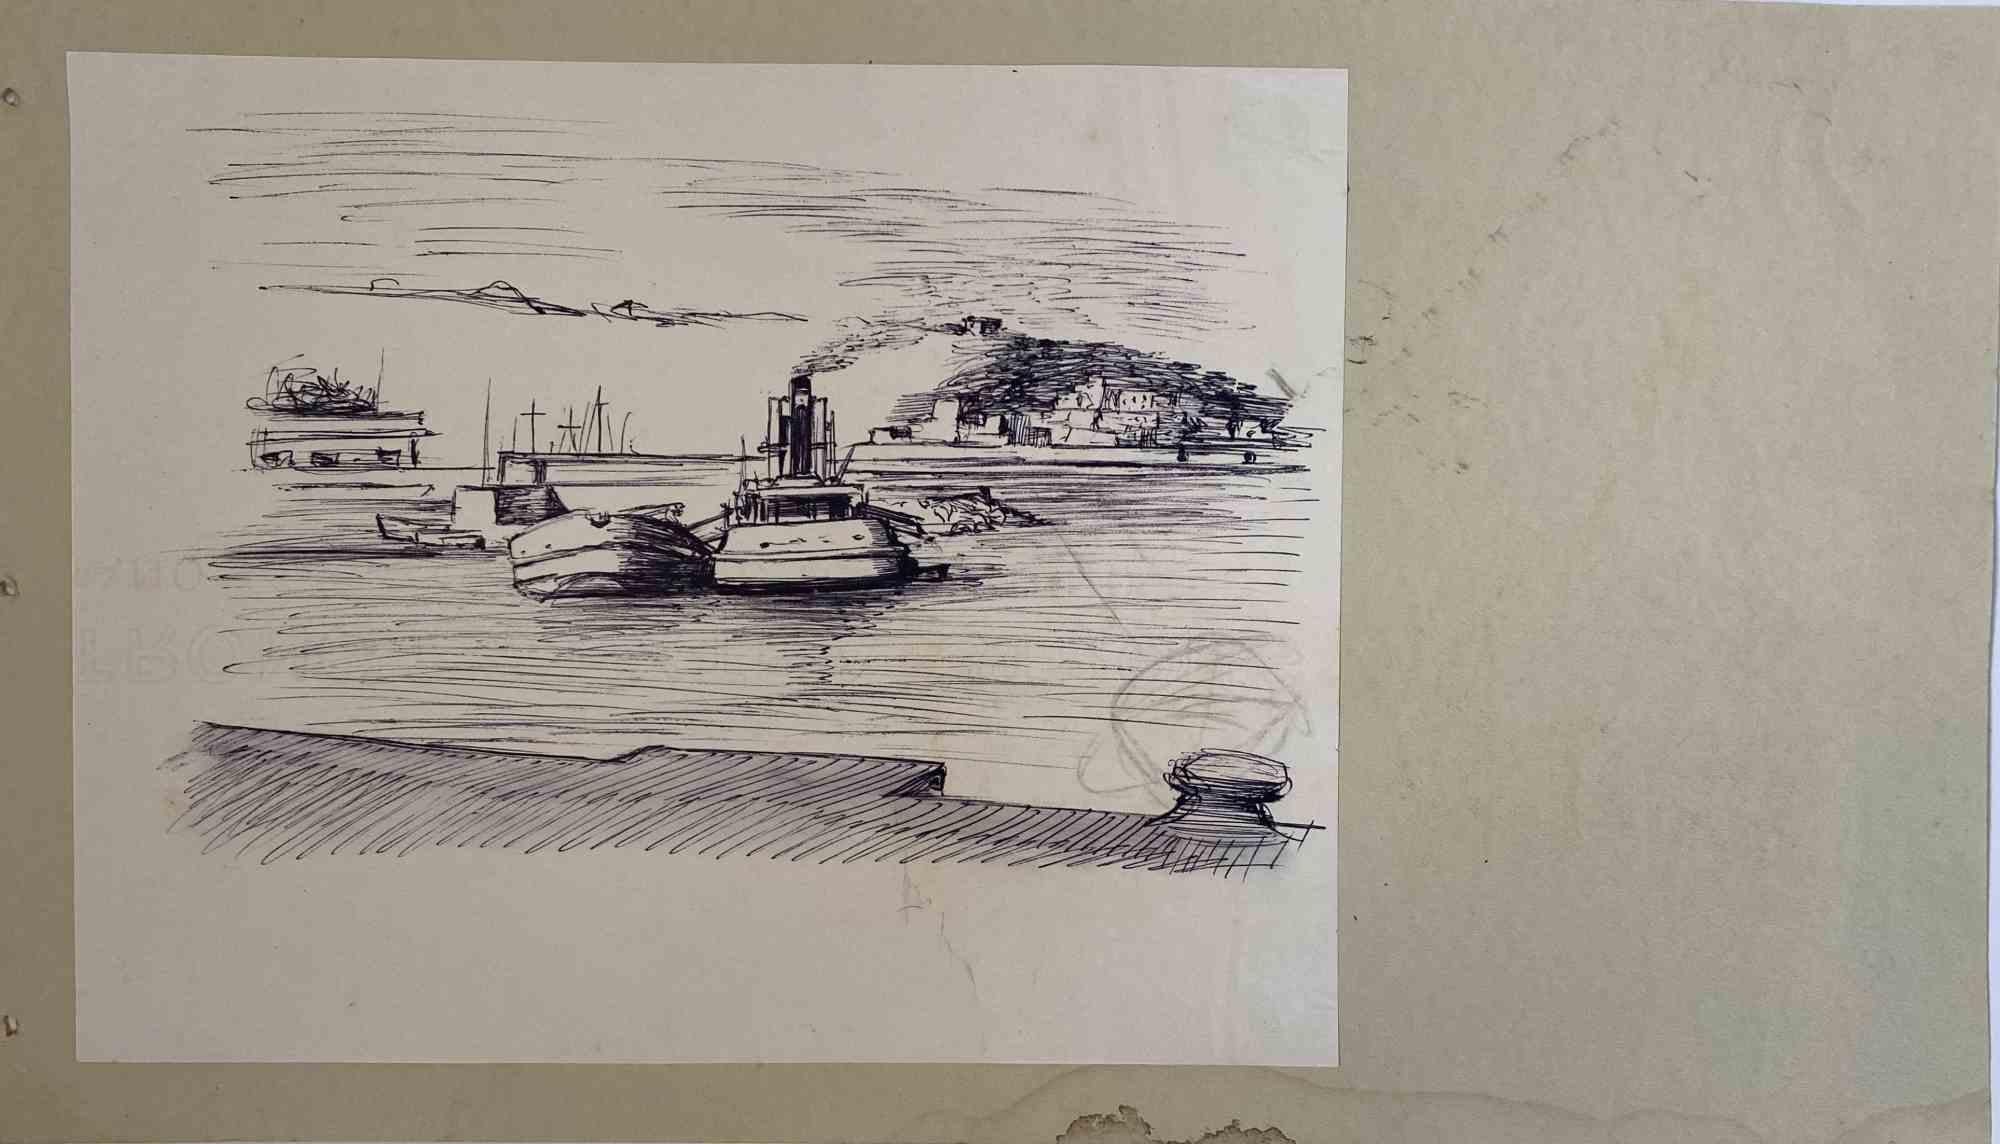 Unknown Figurative Art - The Port - Original Pen And Pencil Drawing - Mid 20th Century